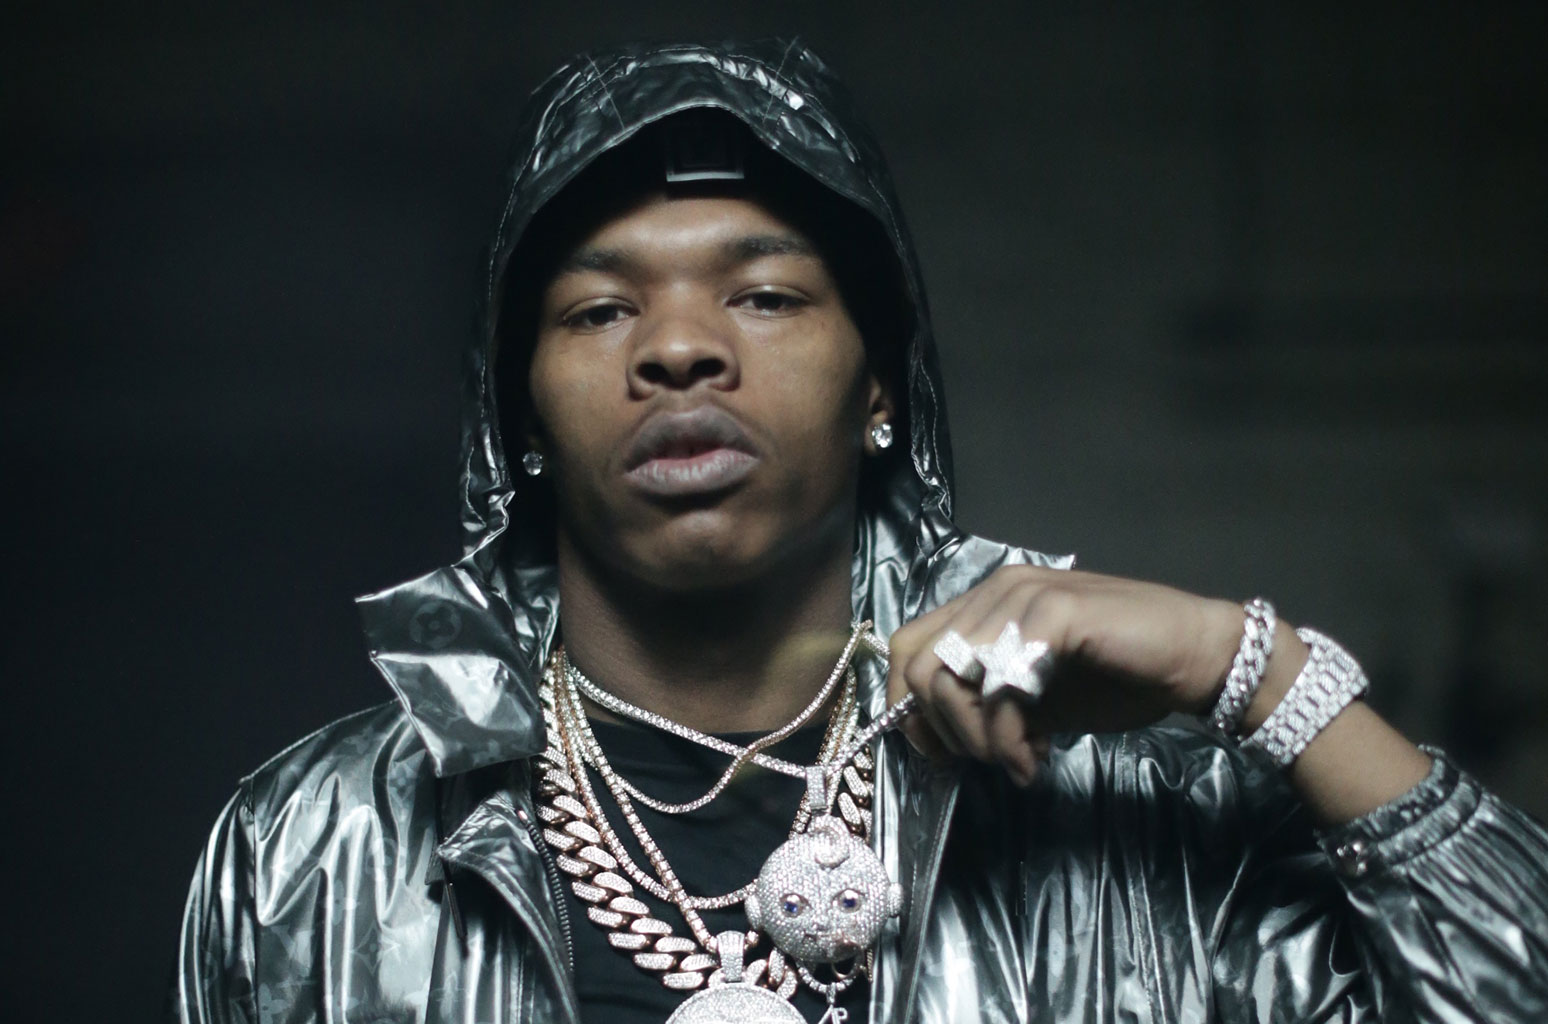 Lil Baby Has Revealed The Tracklist For His Highly-Anticipated Album “My Turn,” Check Below